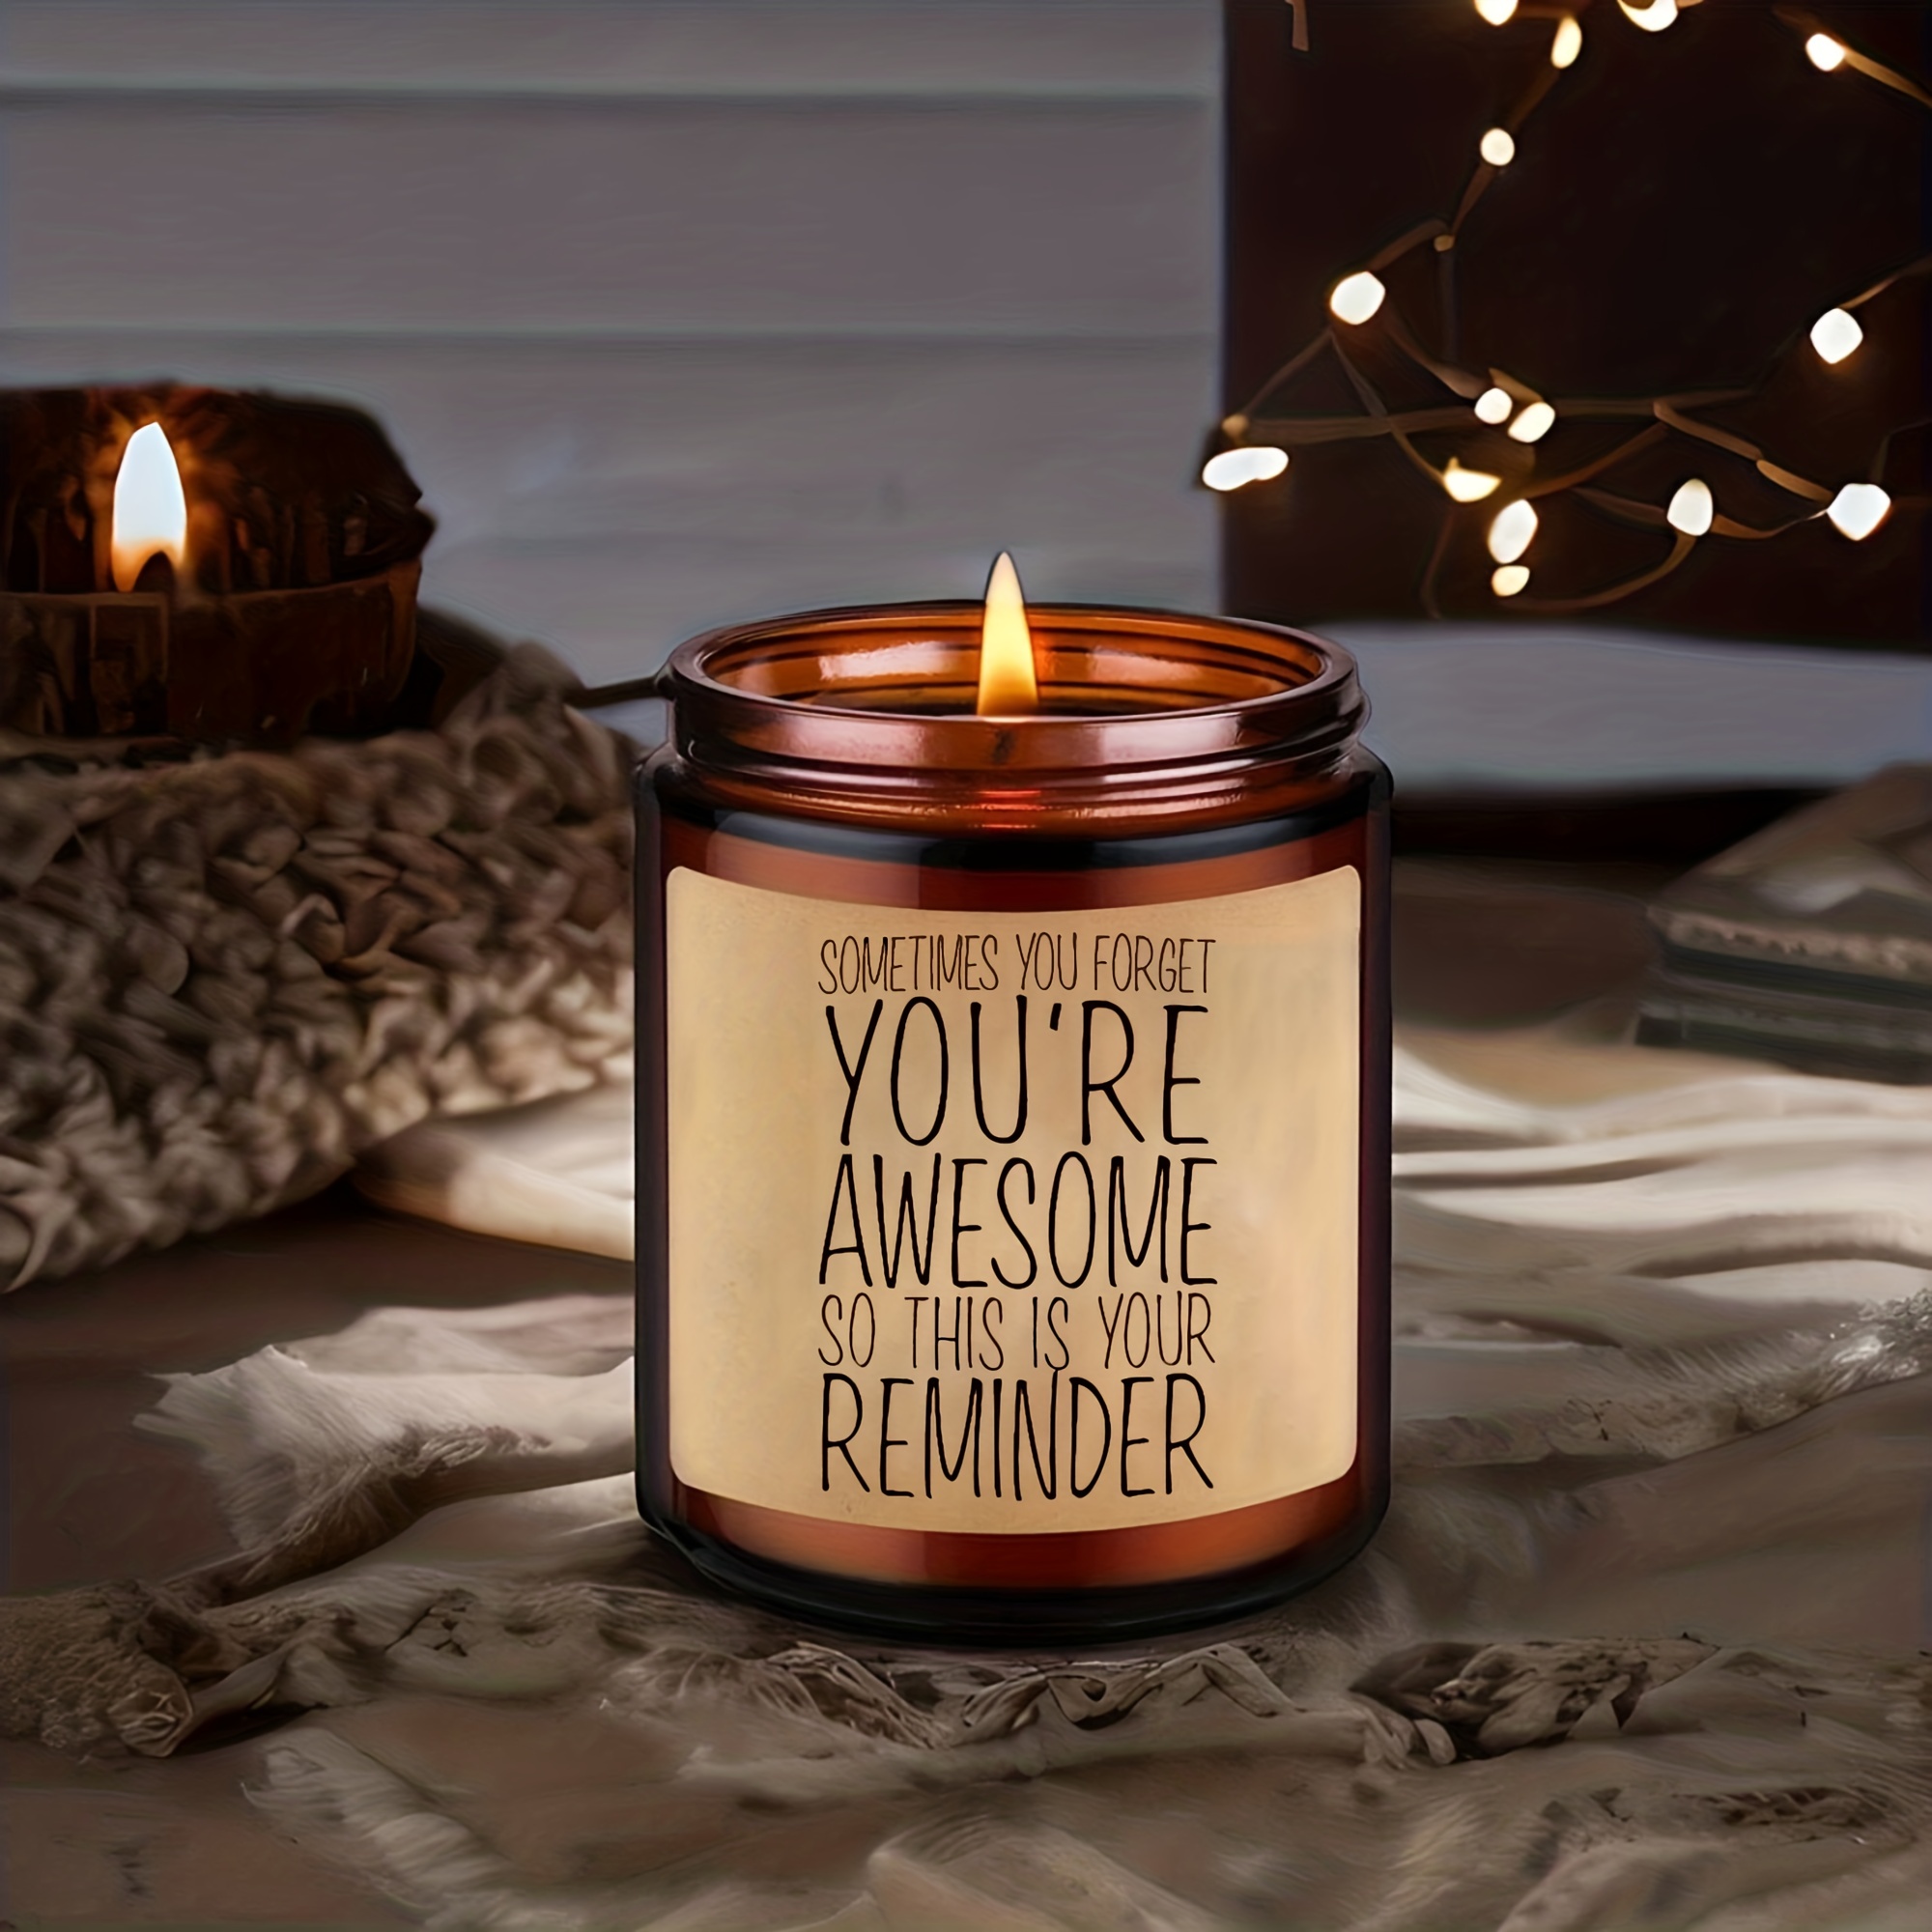 Fun Motivational Gifts for Employee Recognition